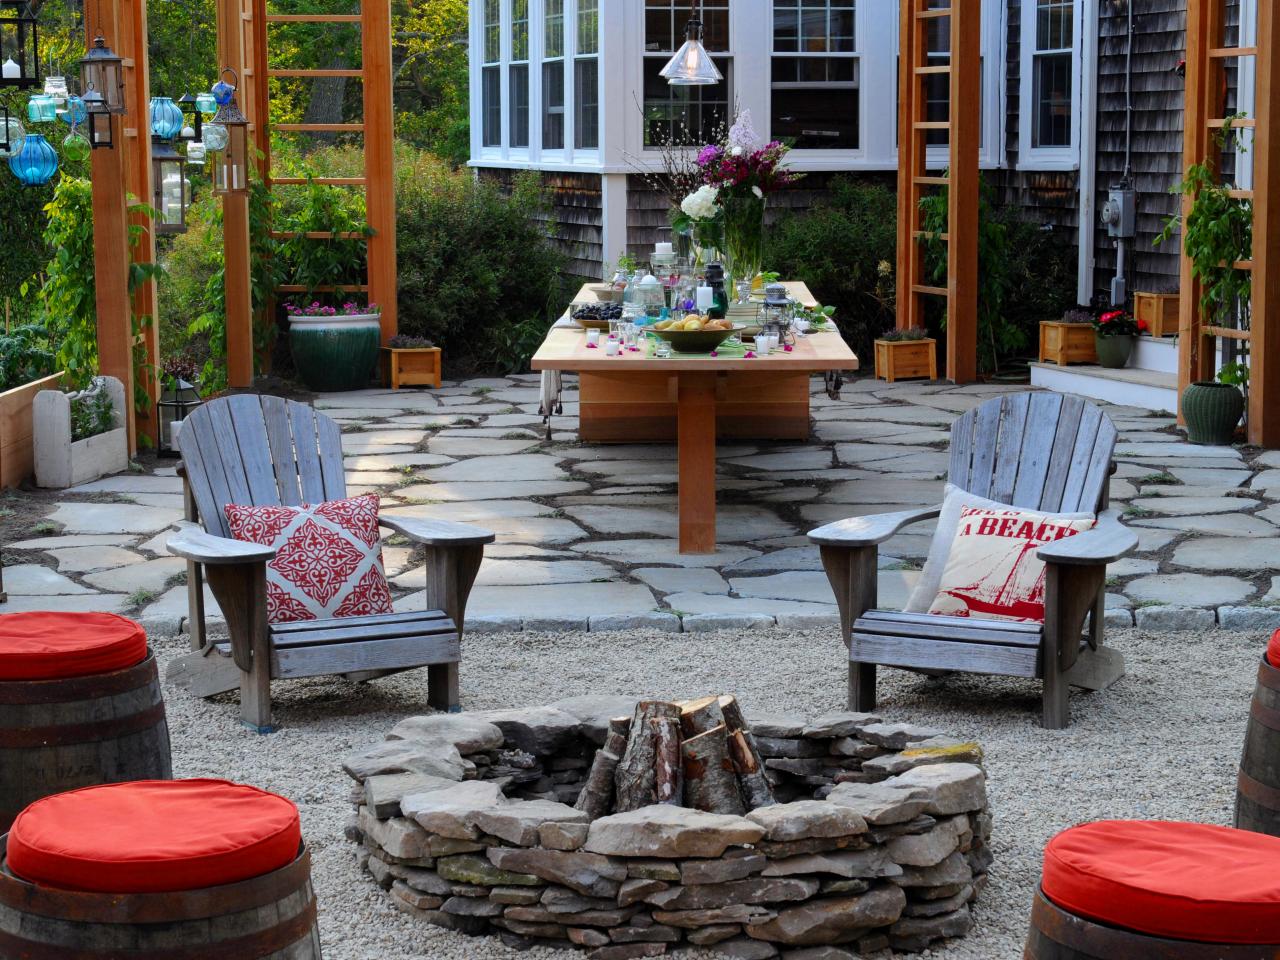 66 Fire Pit and Outdoor Fireplace Ideas | DIY Network Blog ...